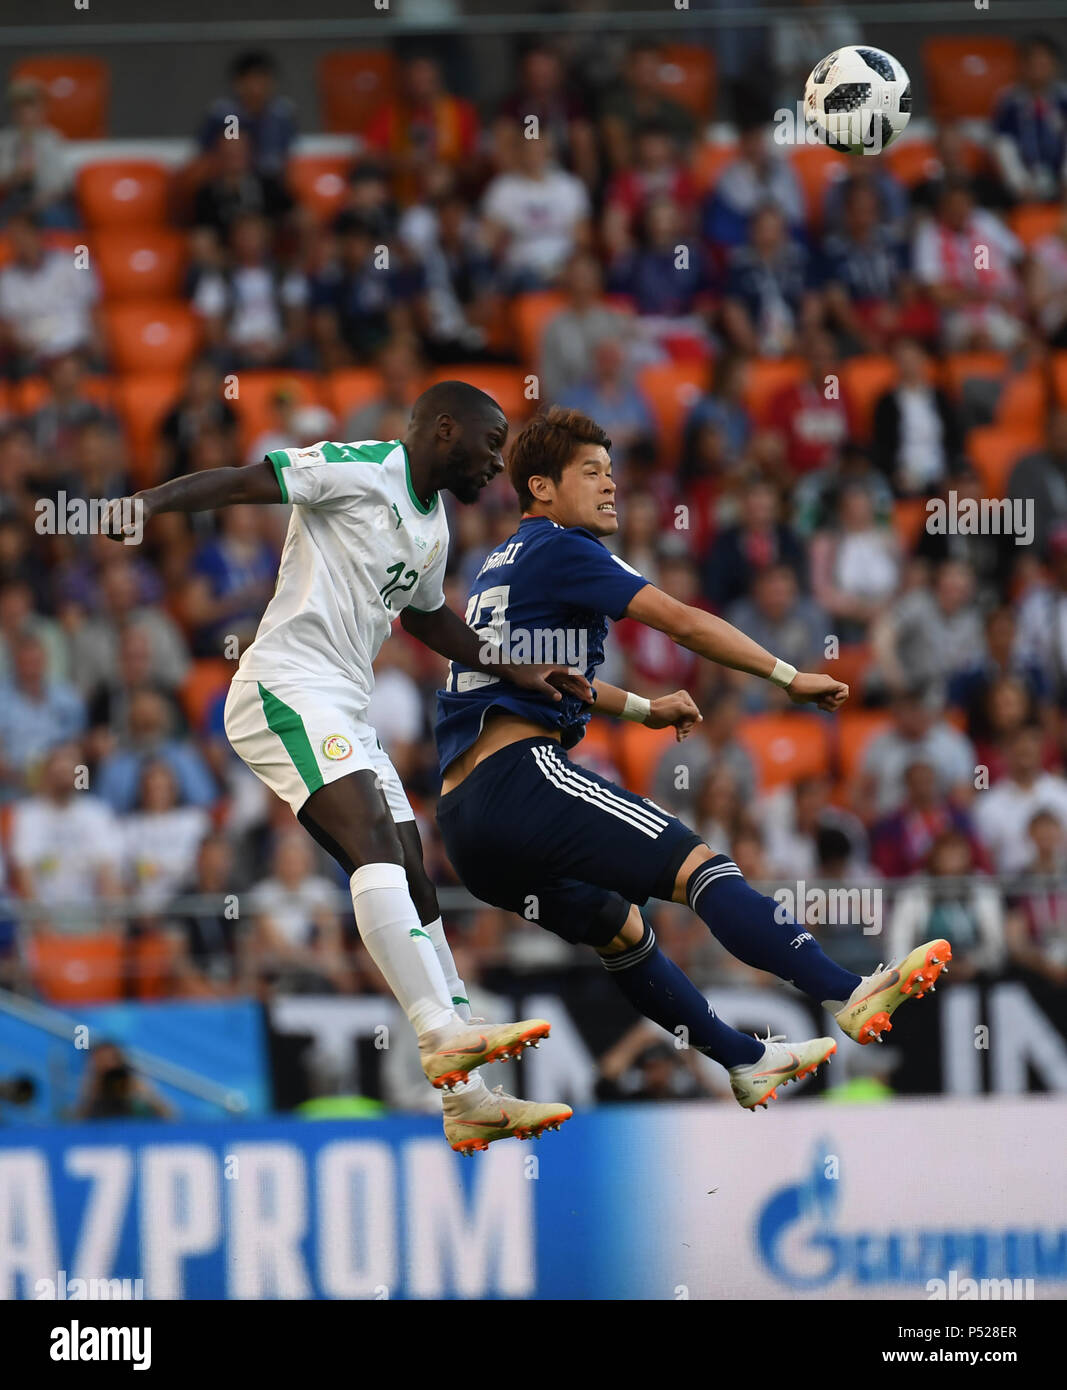 Yekaterinburg, Russia. 24th June, 2018. Hiroki Sakai (R) of Japan vies with Youssouf Sabaly of Senegal during the 2018 FIFA World Cup Group H match between Japan and Senegal in Yekaterinburg, Russia, June 24, 2018. Credit: Chen Cheng/Xinhua/Alamy Live News Stock Photo